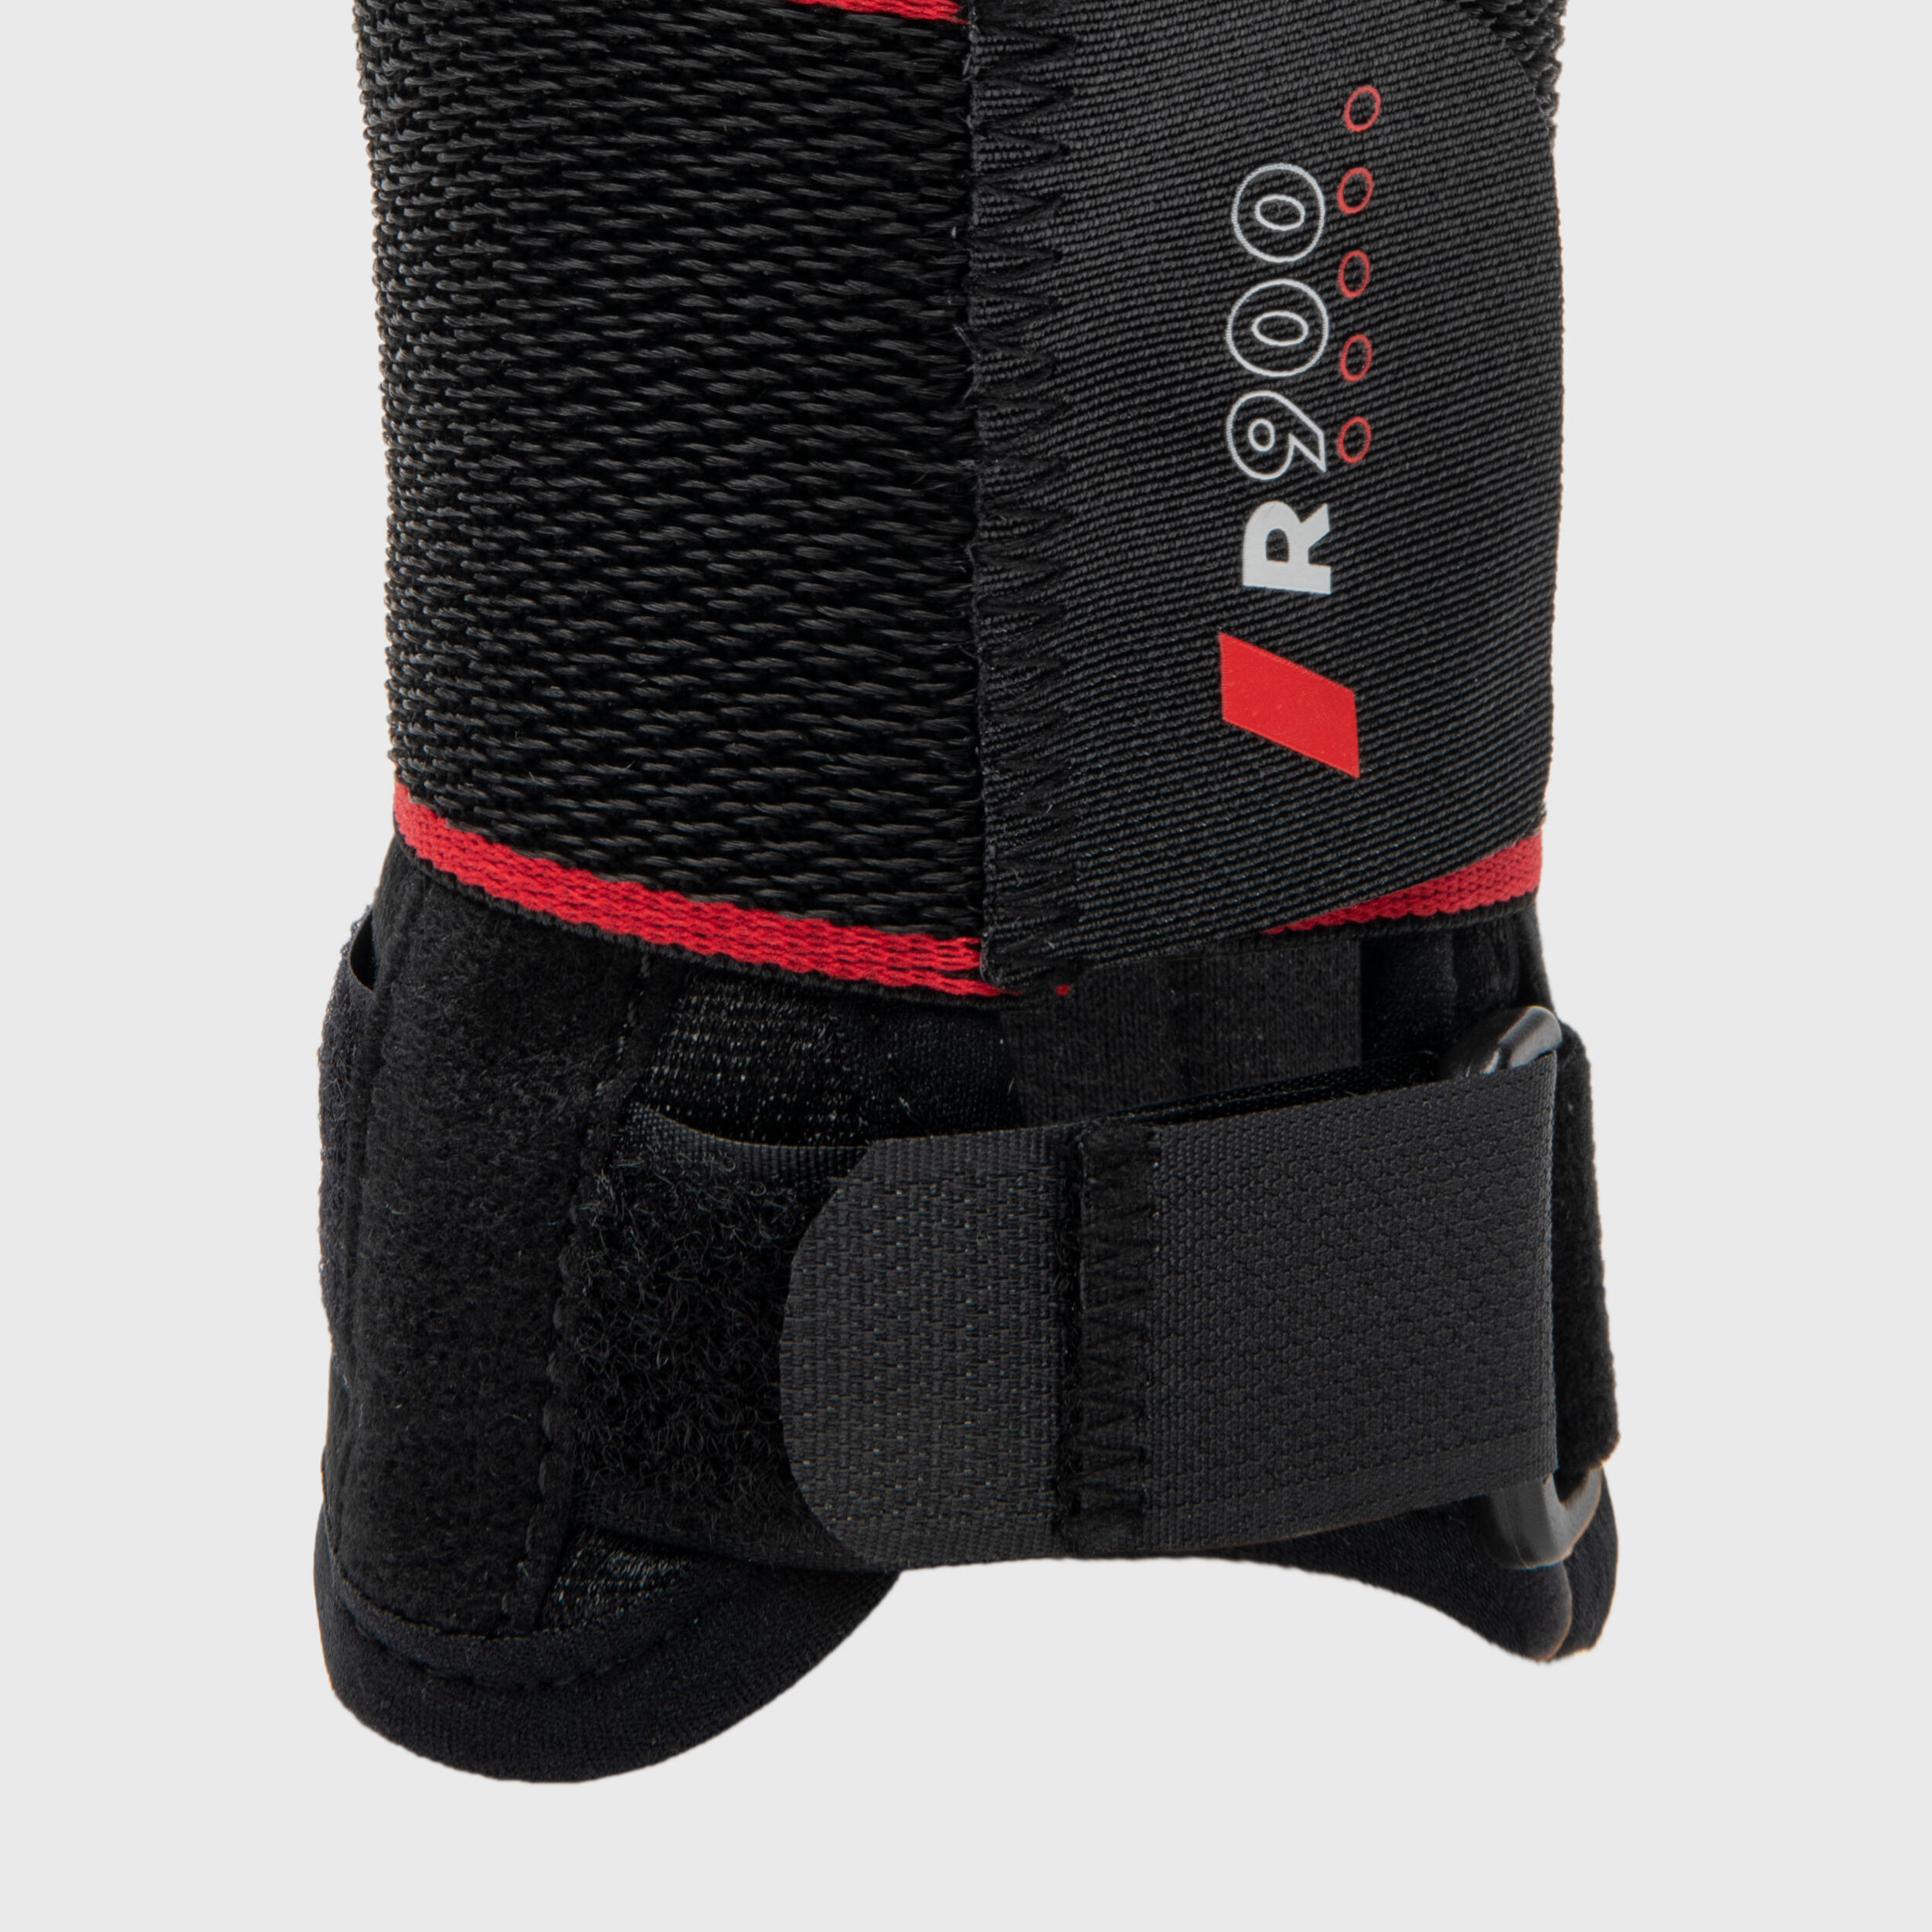 Adult Left/Right Wrist Support Strap R900 - Black 7/7